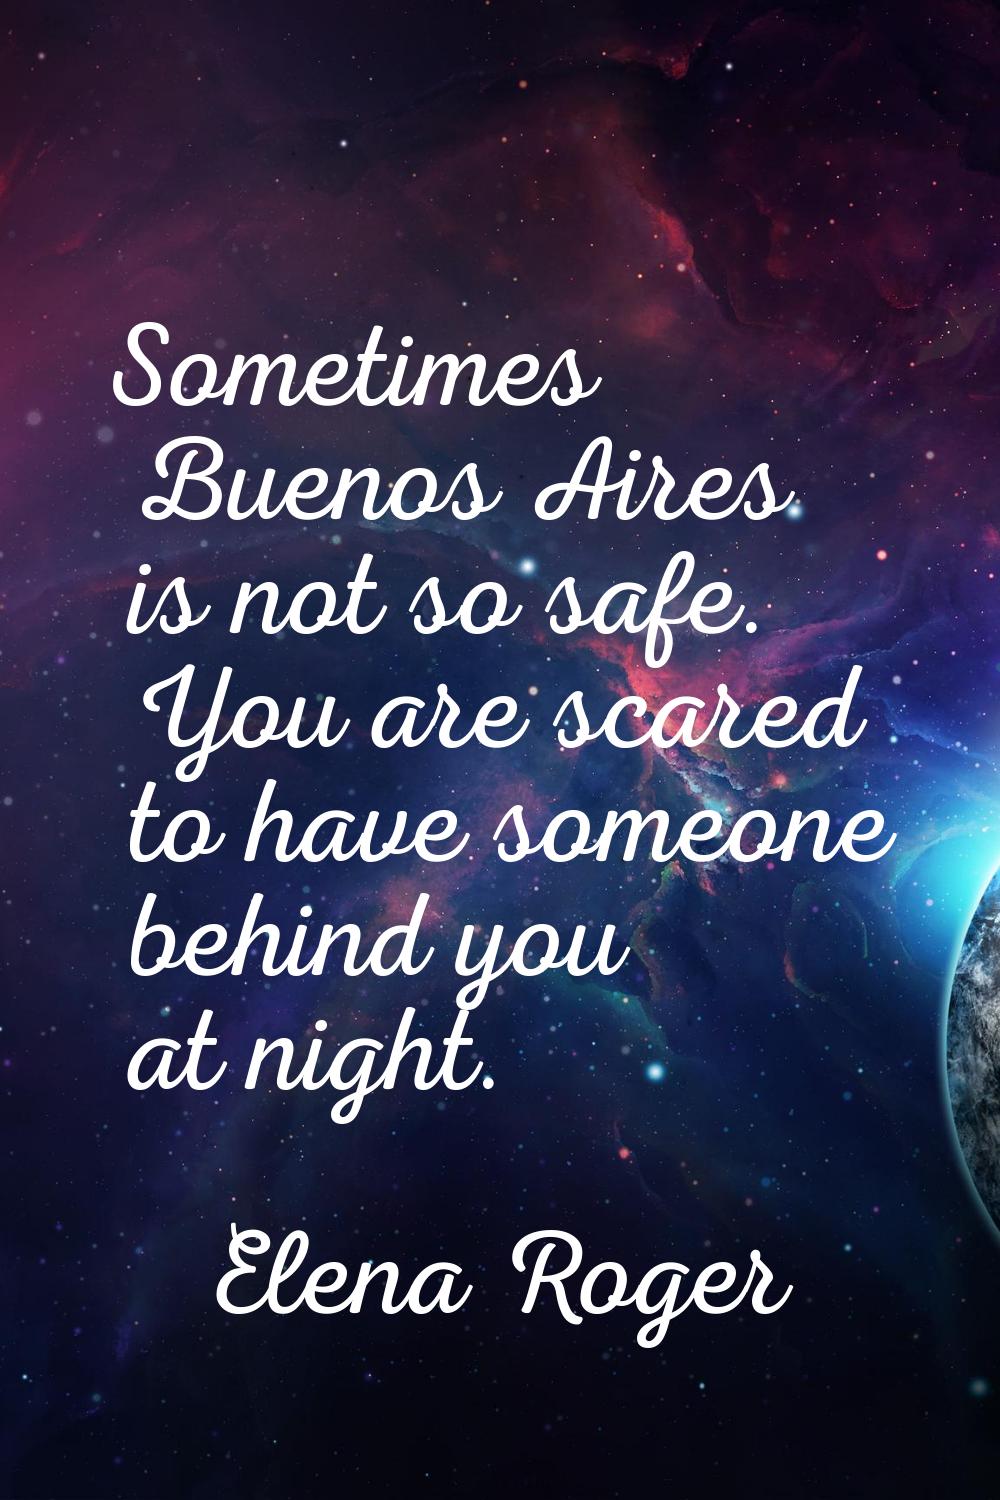 Sometimes Buenos Aires is not so safe. You are scared to have someone behind you at night.